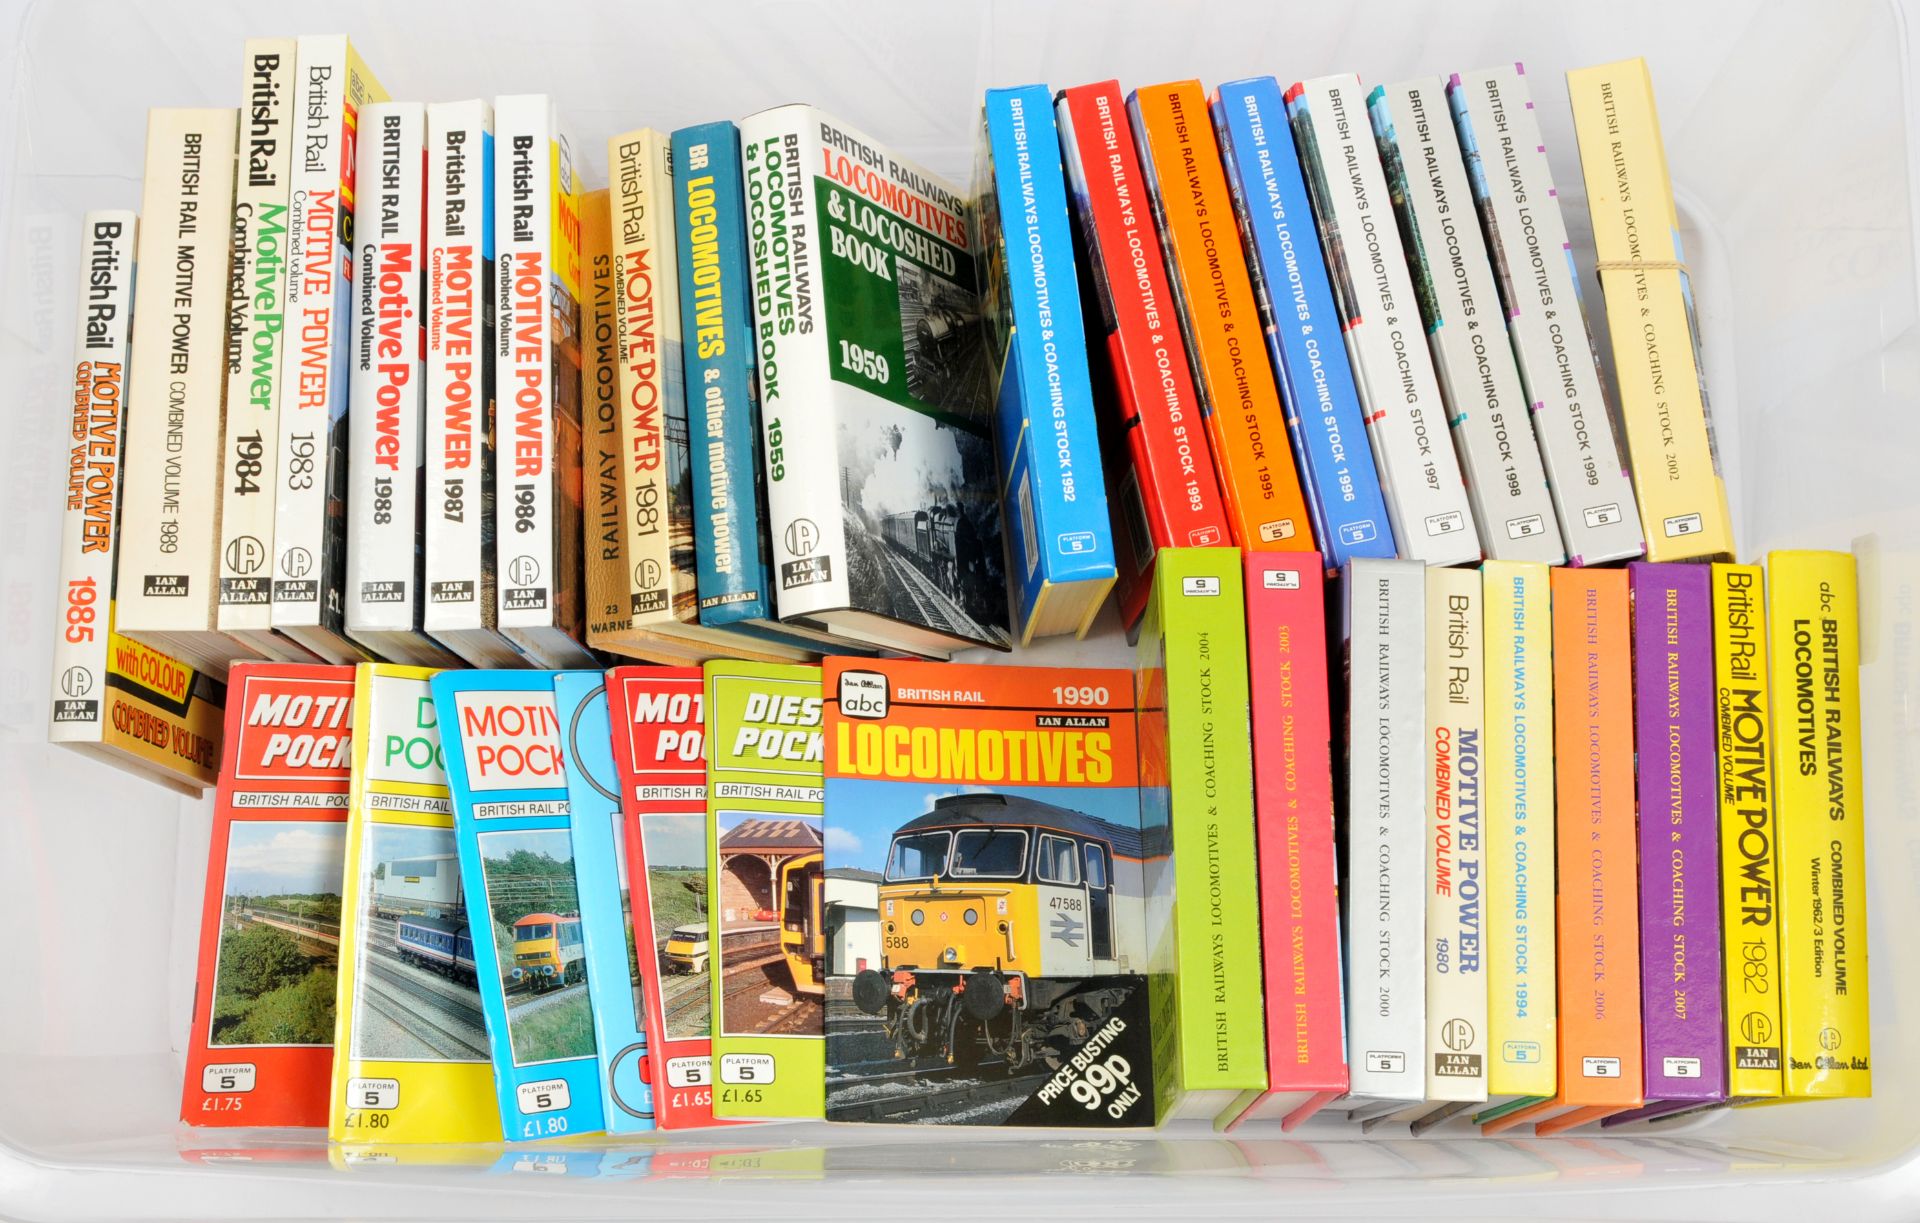 Ian Allen and other Publishers Railway hard and soft back reference books